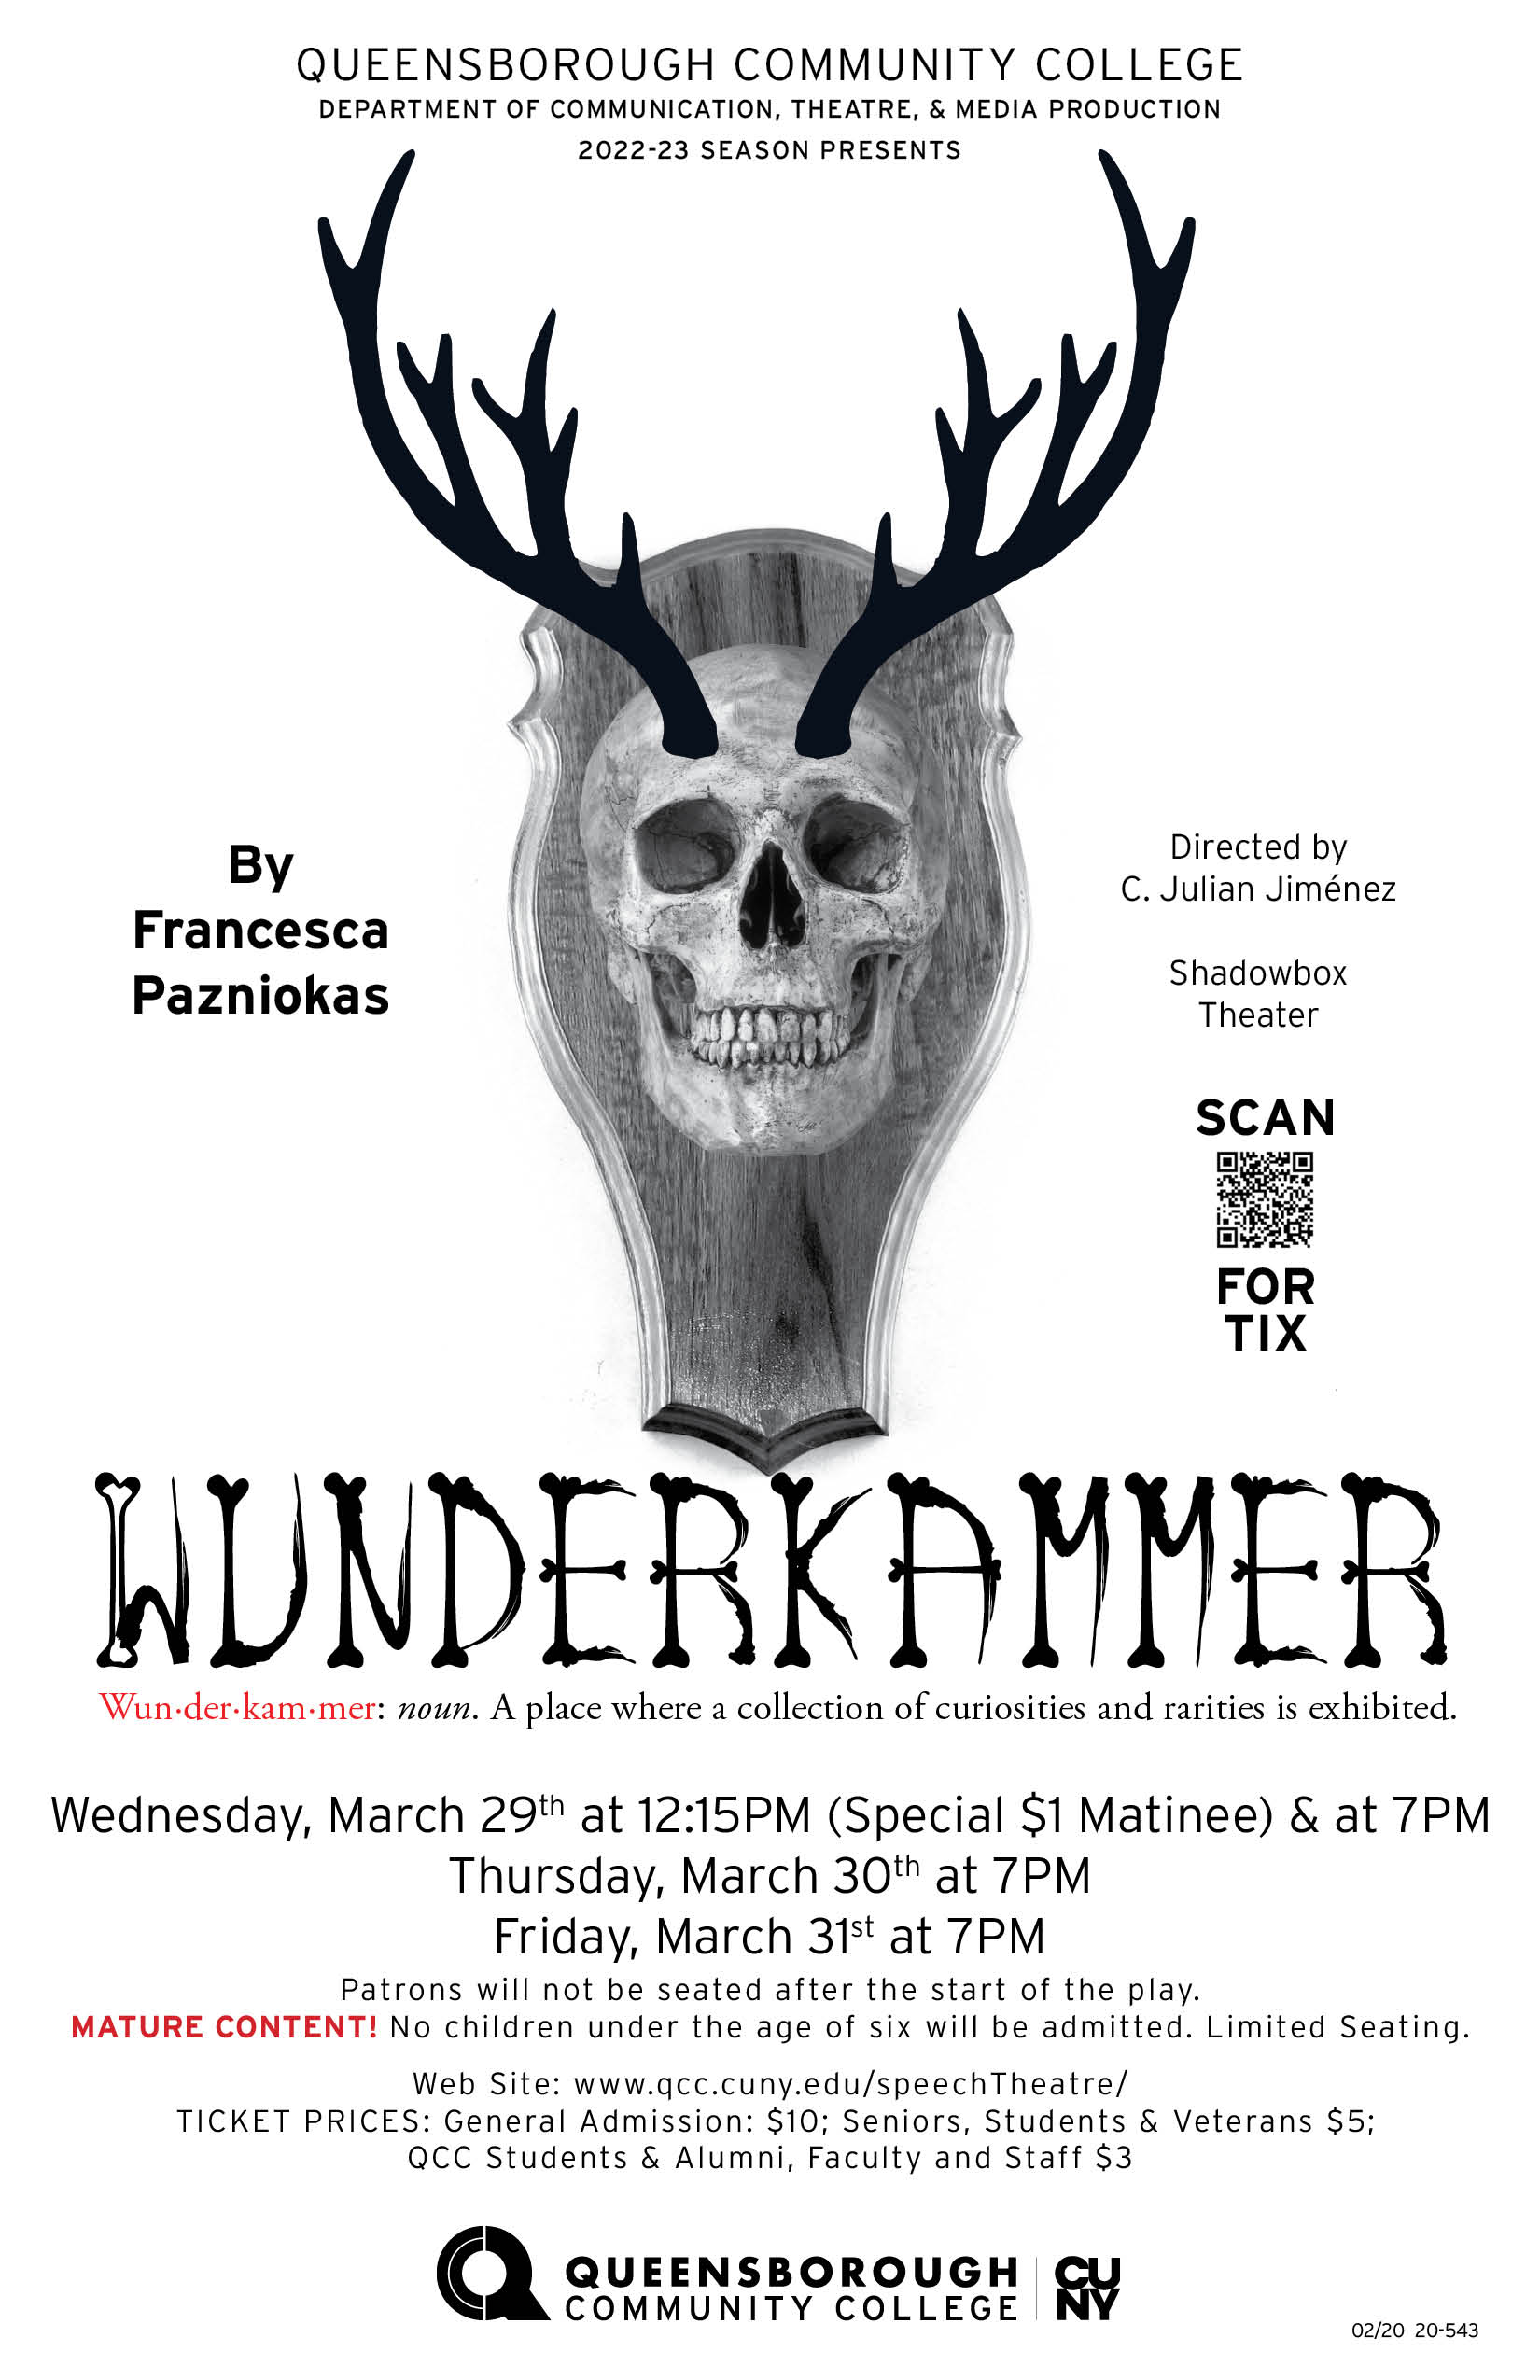 This is a poster for the spring 2023 production of ‘Wunderkammer’ by Francesca Pazniokas and Directed by Professor Jimenez. The poster displays a plaque with a human skull with deer antlers protruding from its forehead.